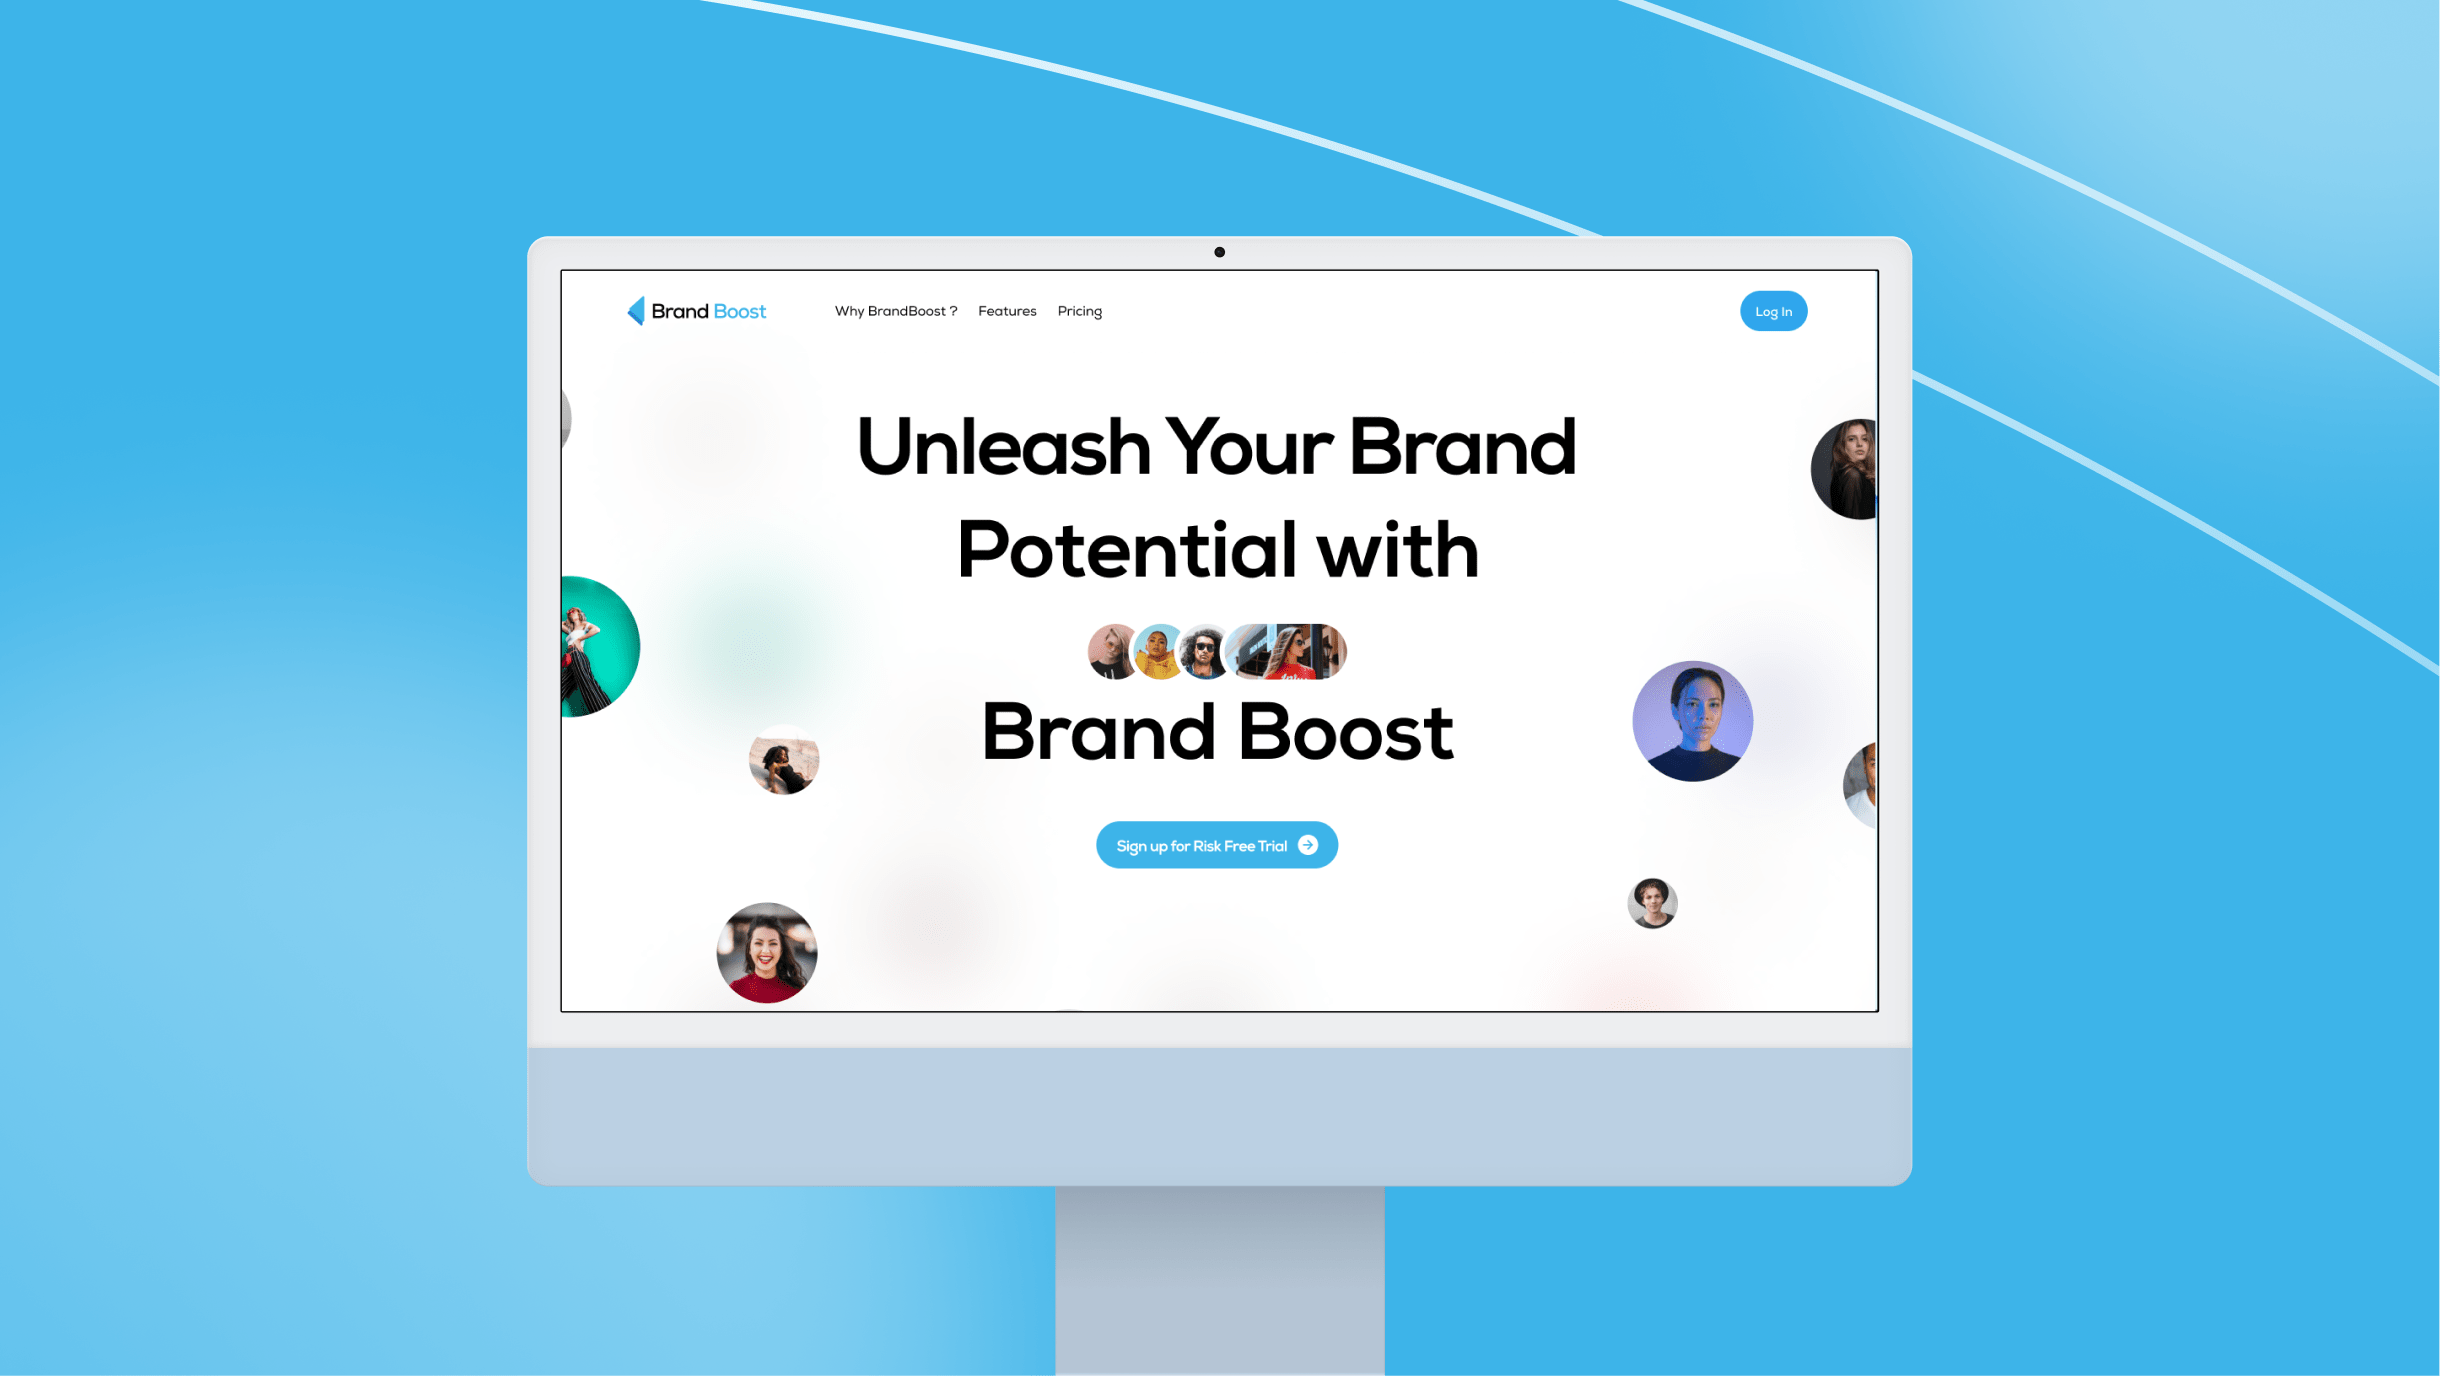 Clean website mockup for Brand Boost by Brand Vision Marketing